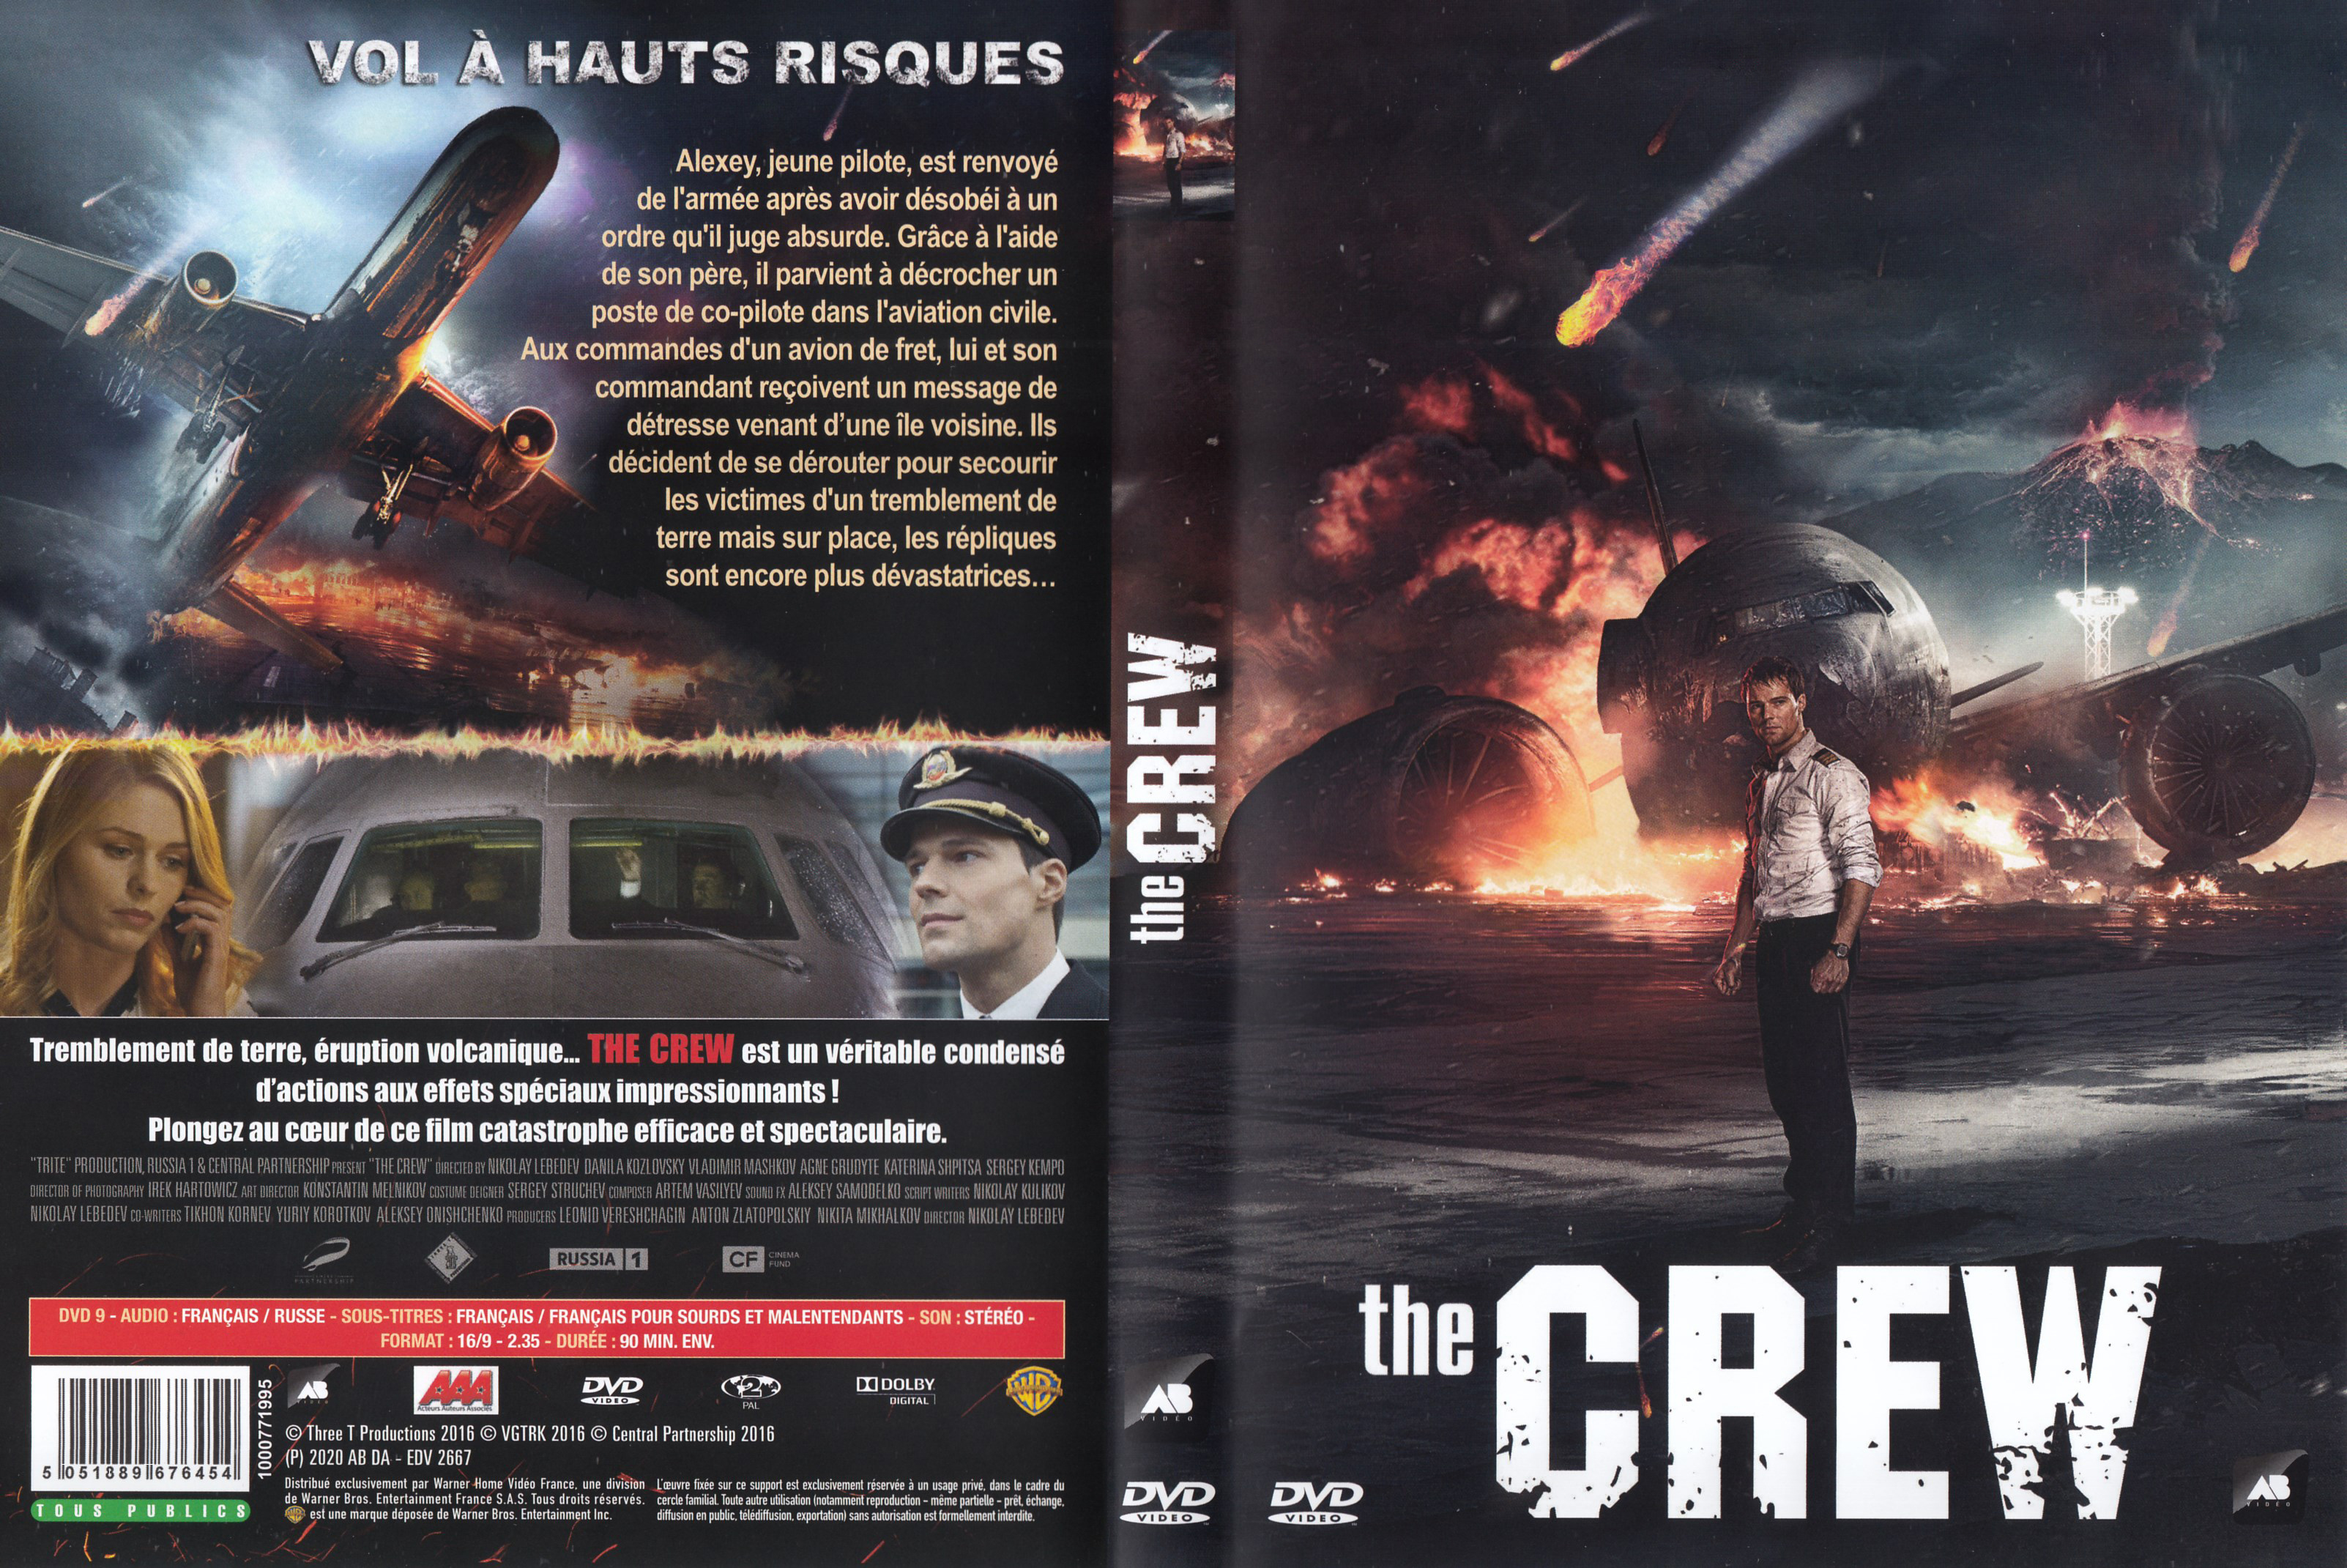 Jaquette DVD The crew (2020)